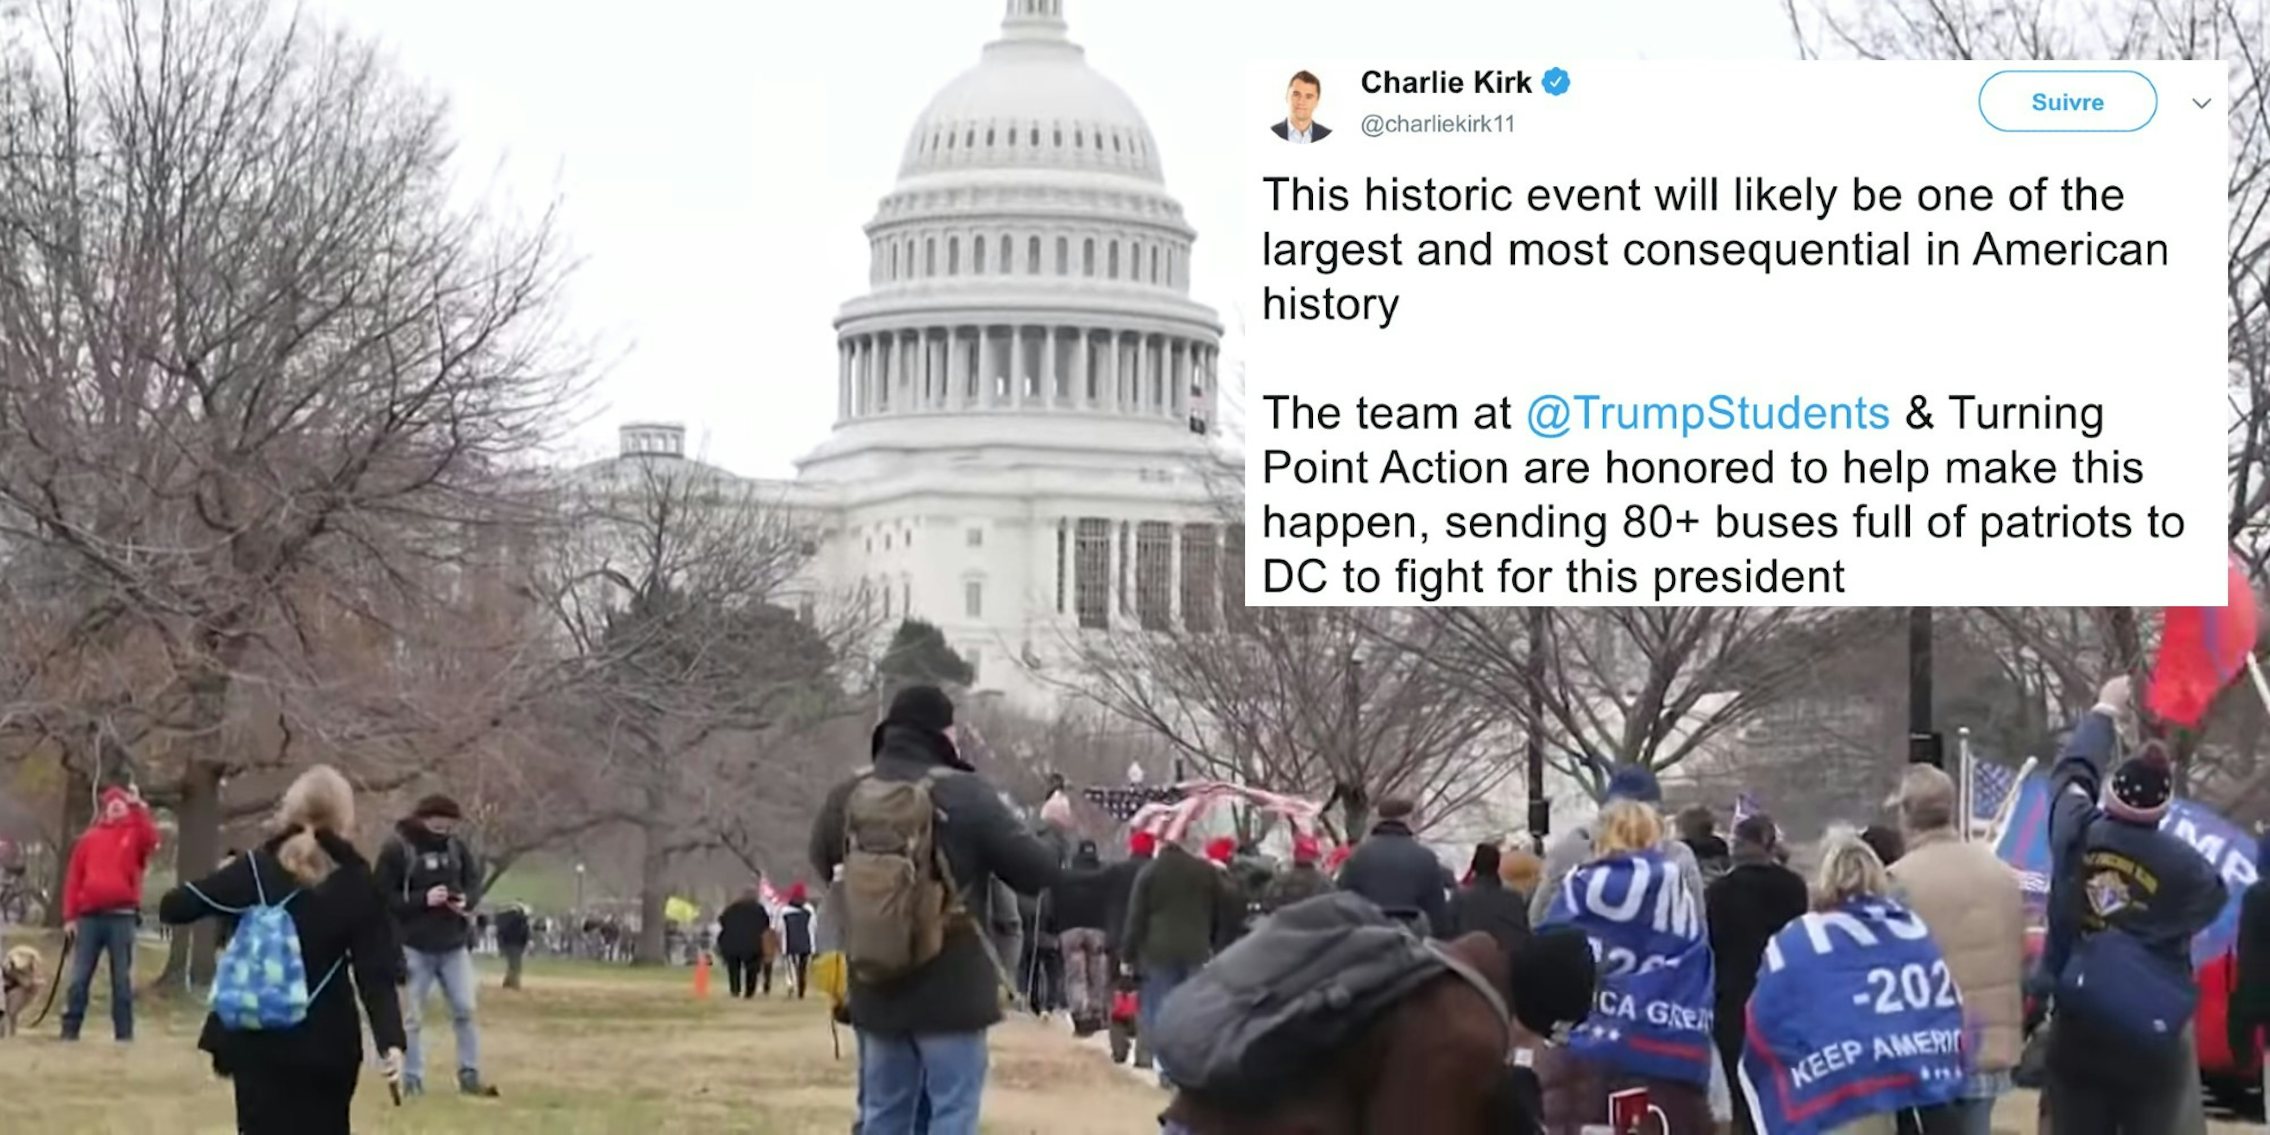 A tweet from Charlie Kirk over the Capitol